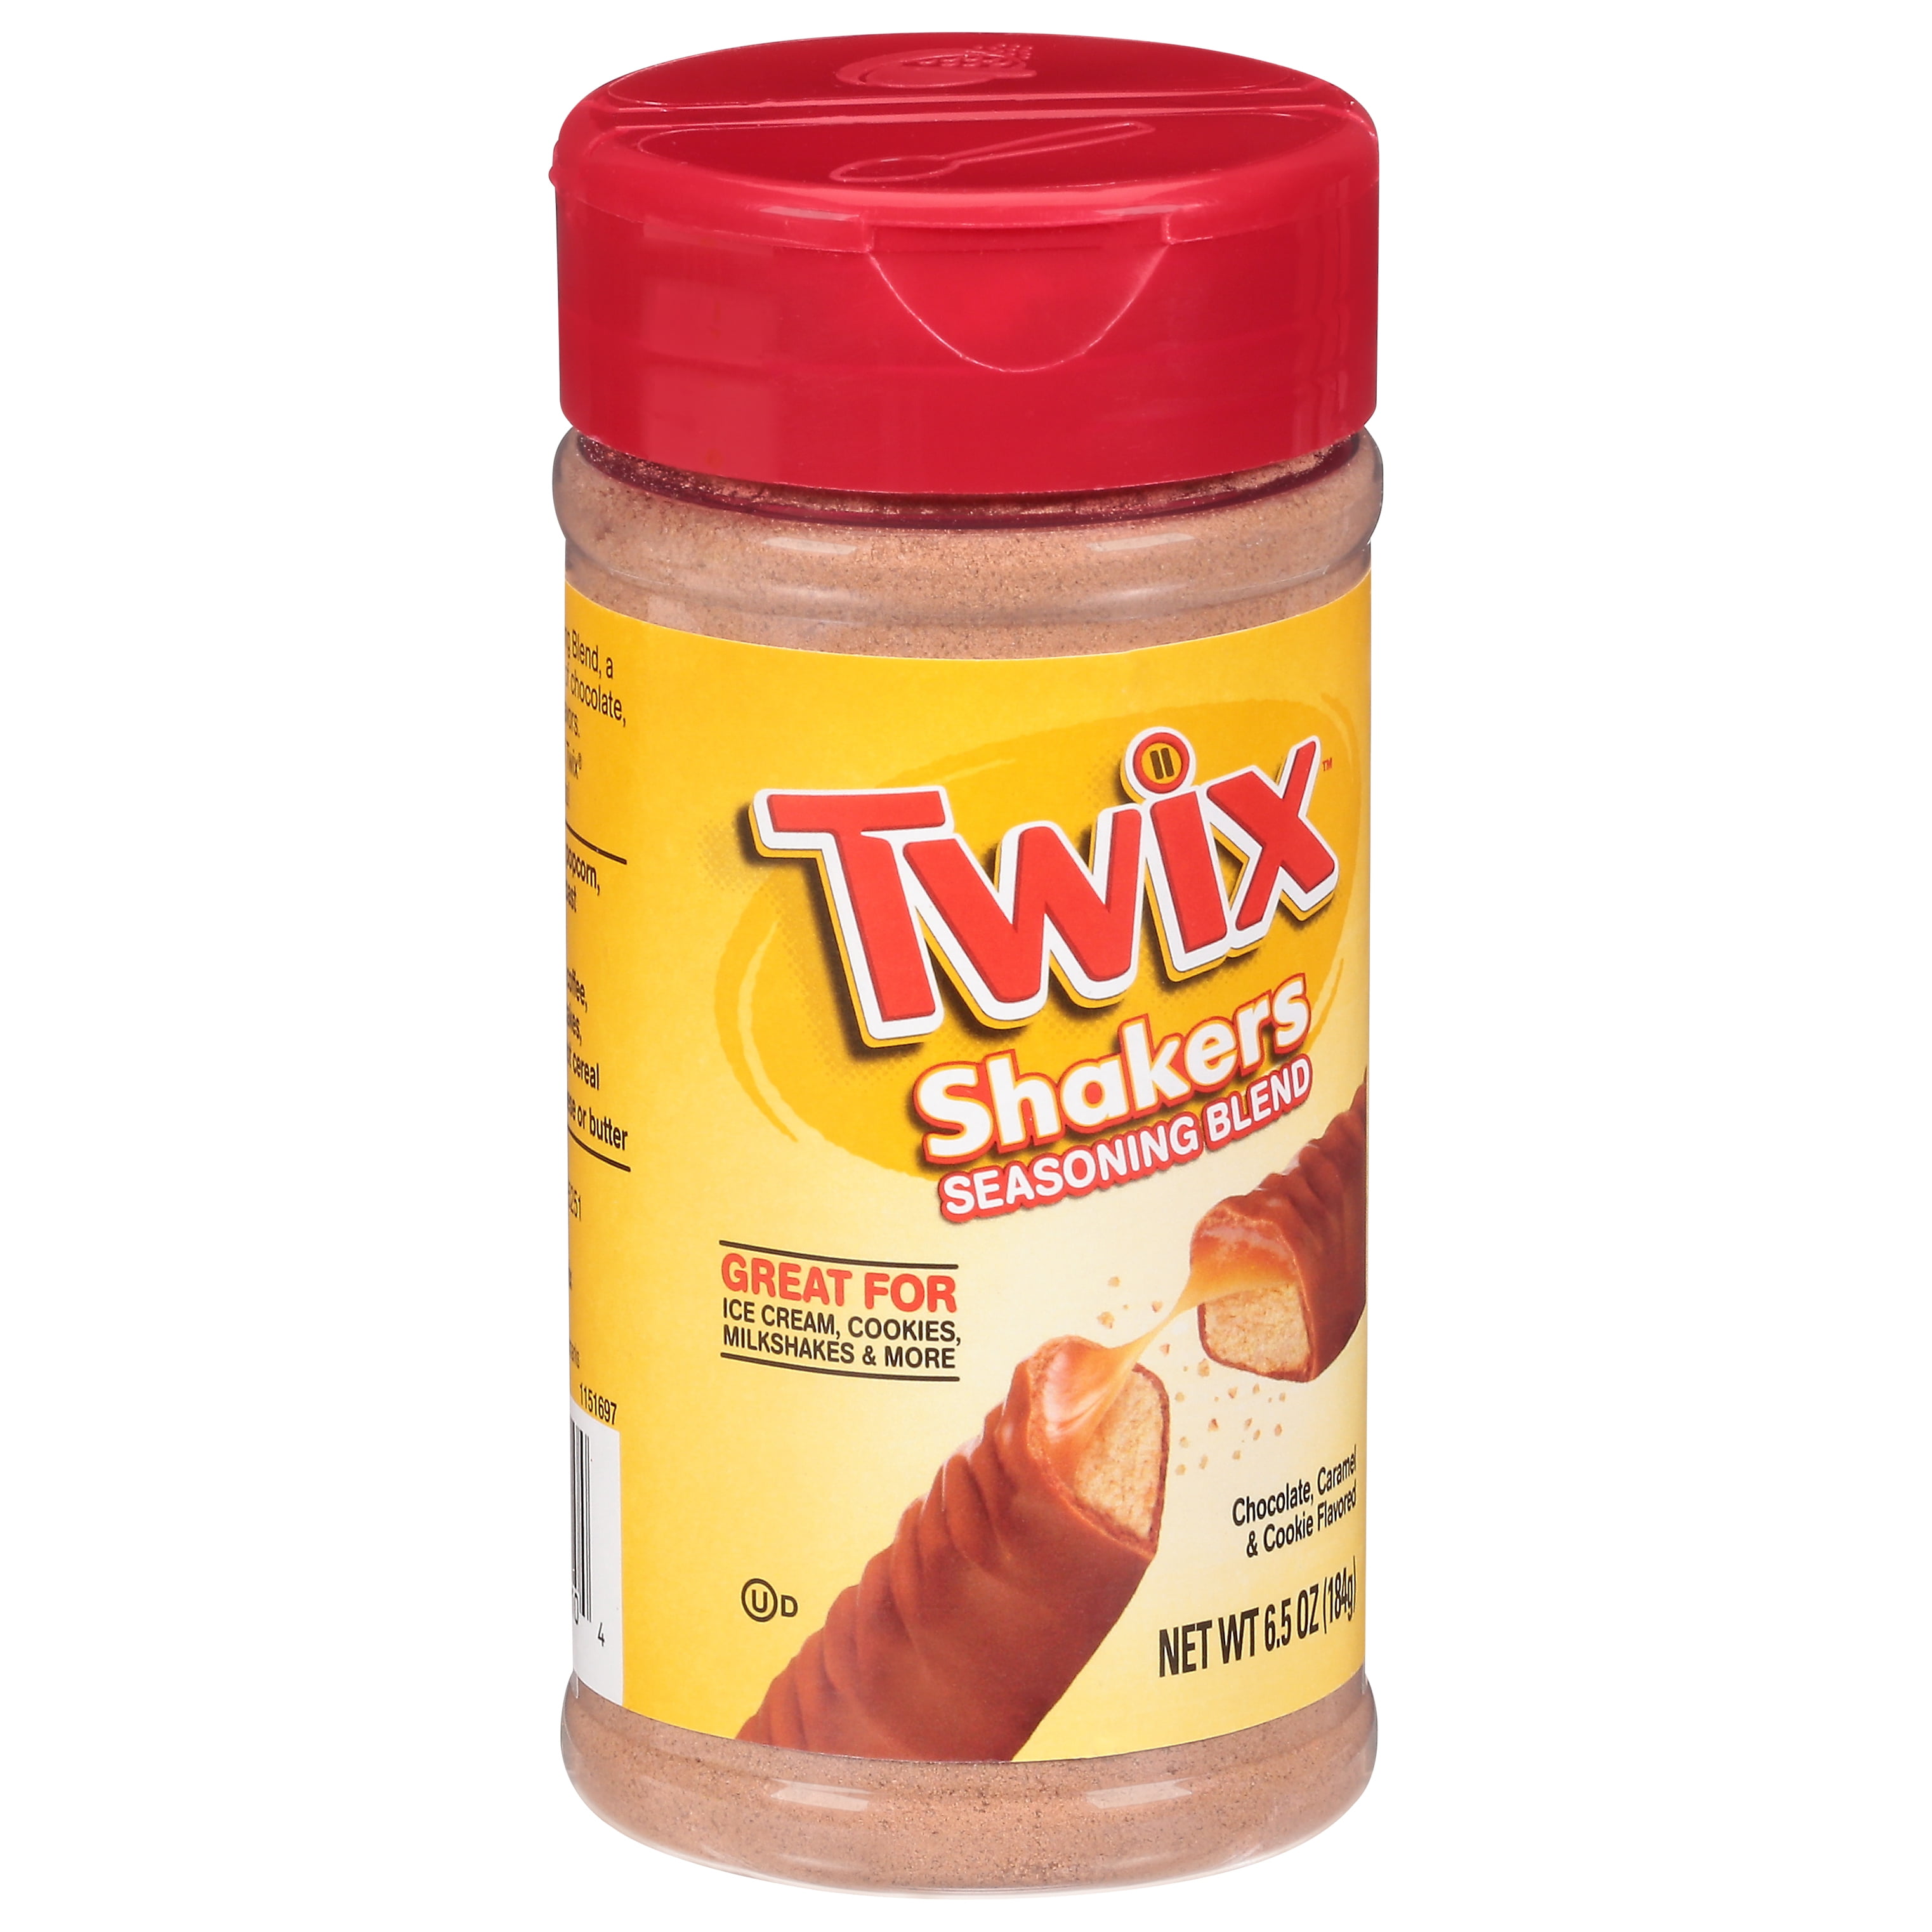 New Twix Shakers Seasoning Blend Arrives At Sam's Club On September 1, 2021  - Chew Boom